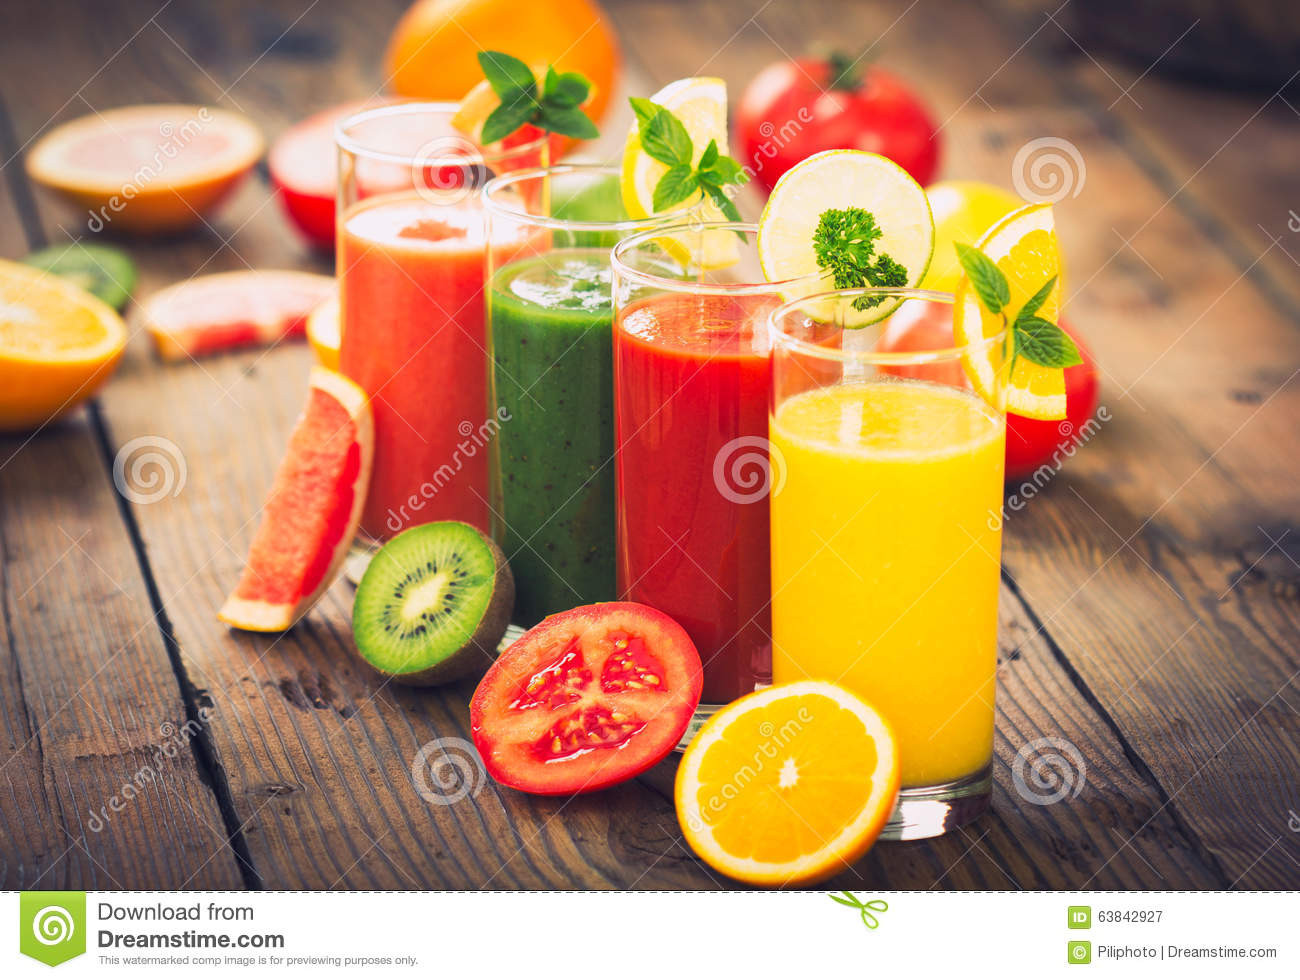 Veg And Fruit Smoothies
 Healthy Fruit And Ve able Smoothies Stock Image